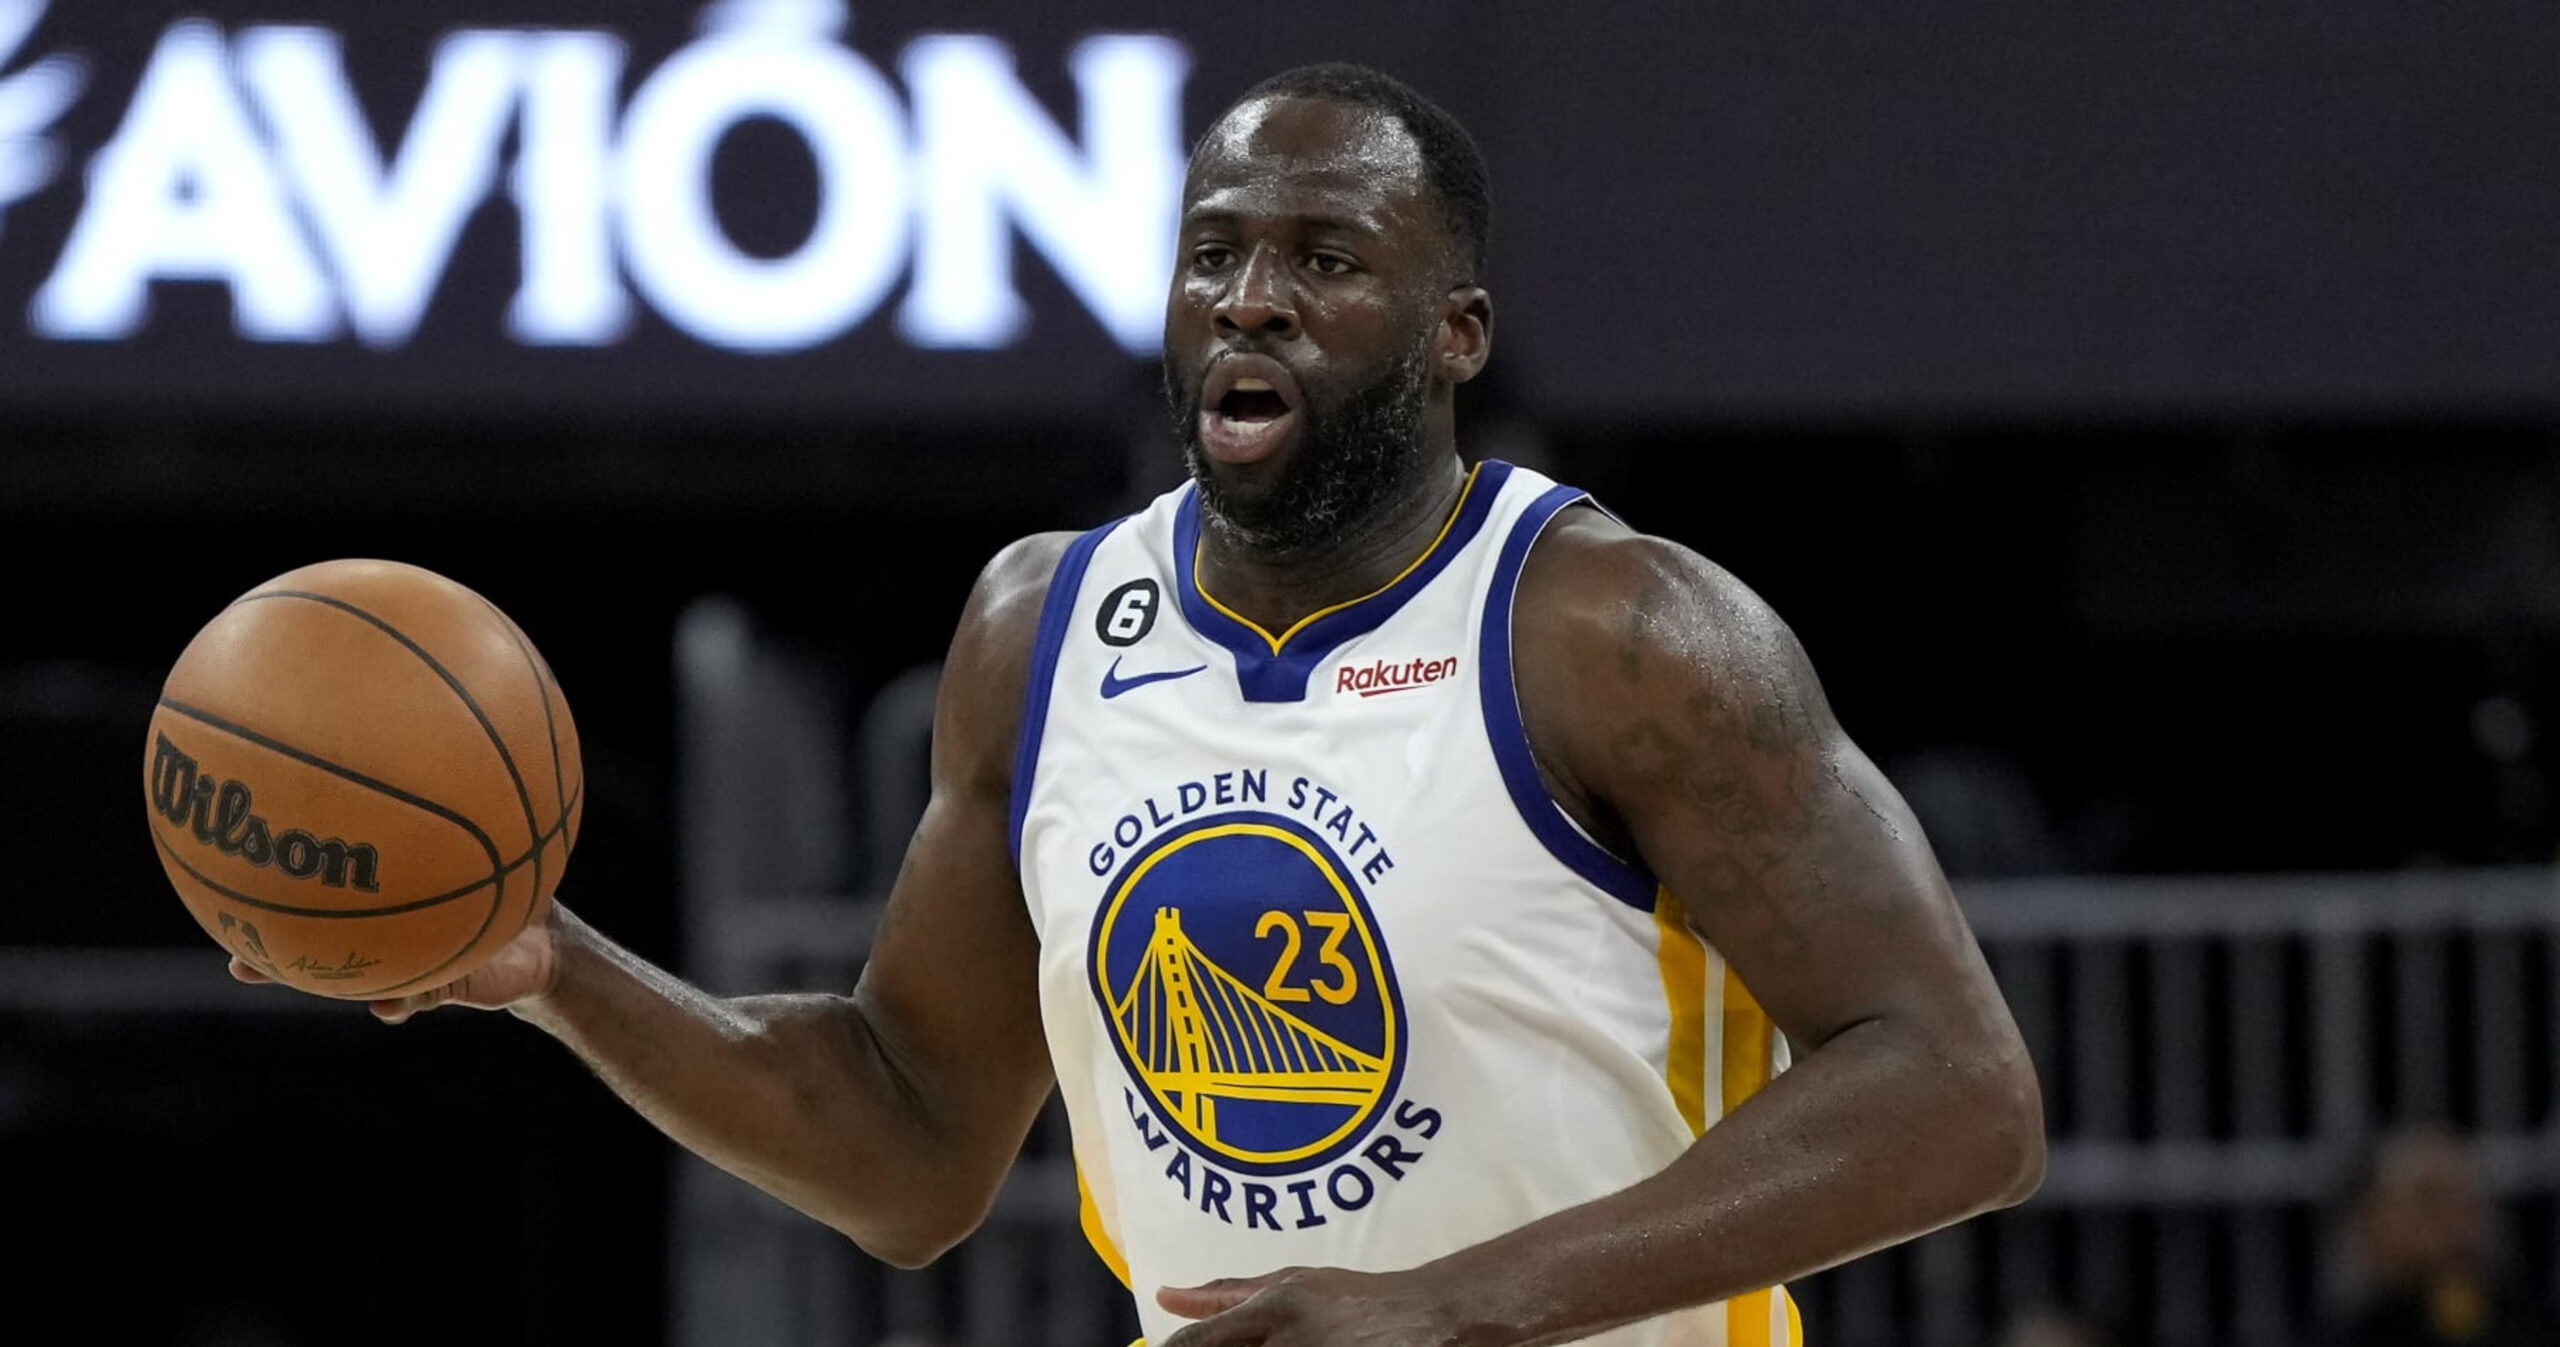 Draymond Green, Cleveland Cavaliers Rumors: Draymond Green to Part Ways With the Golden State Warriors